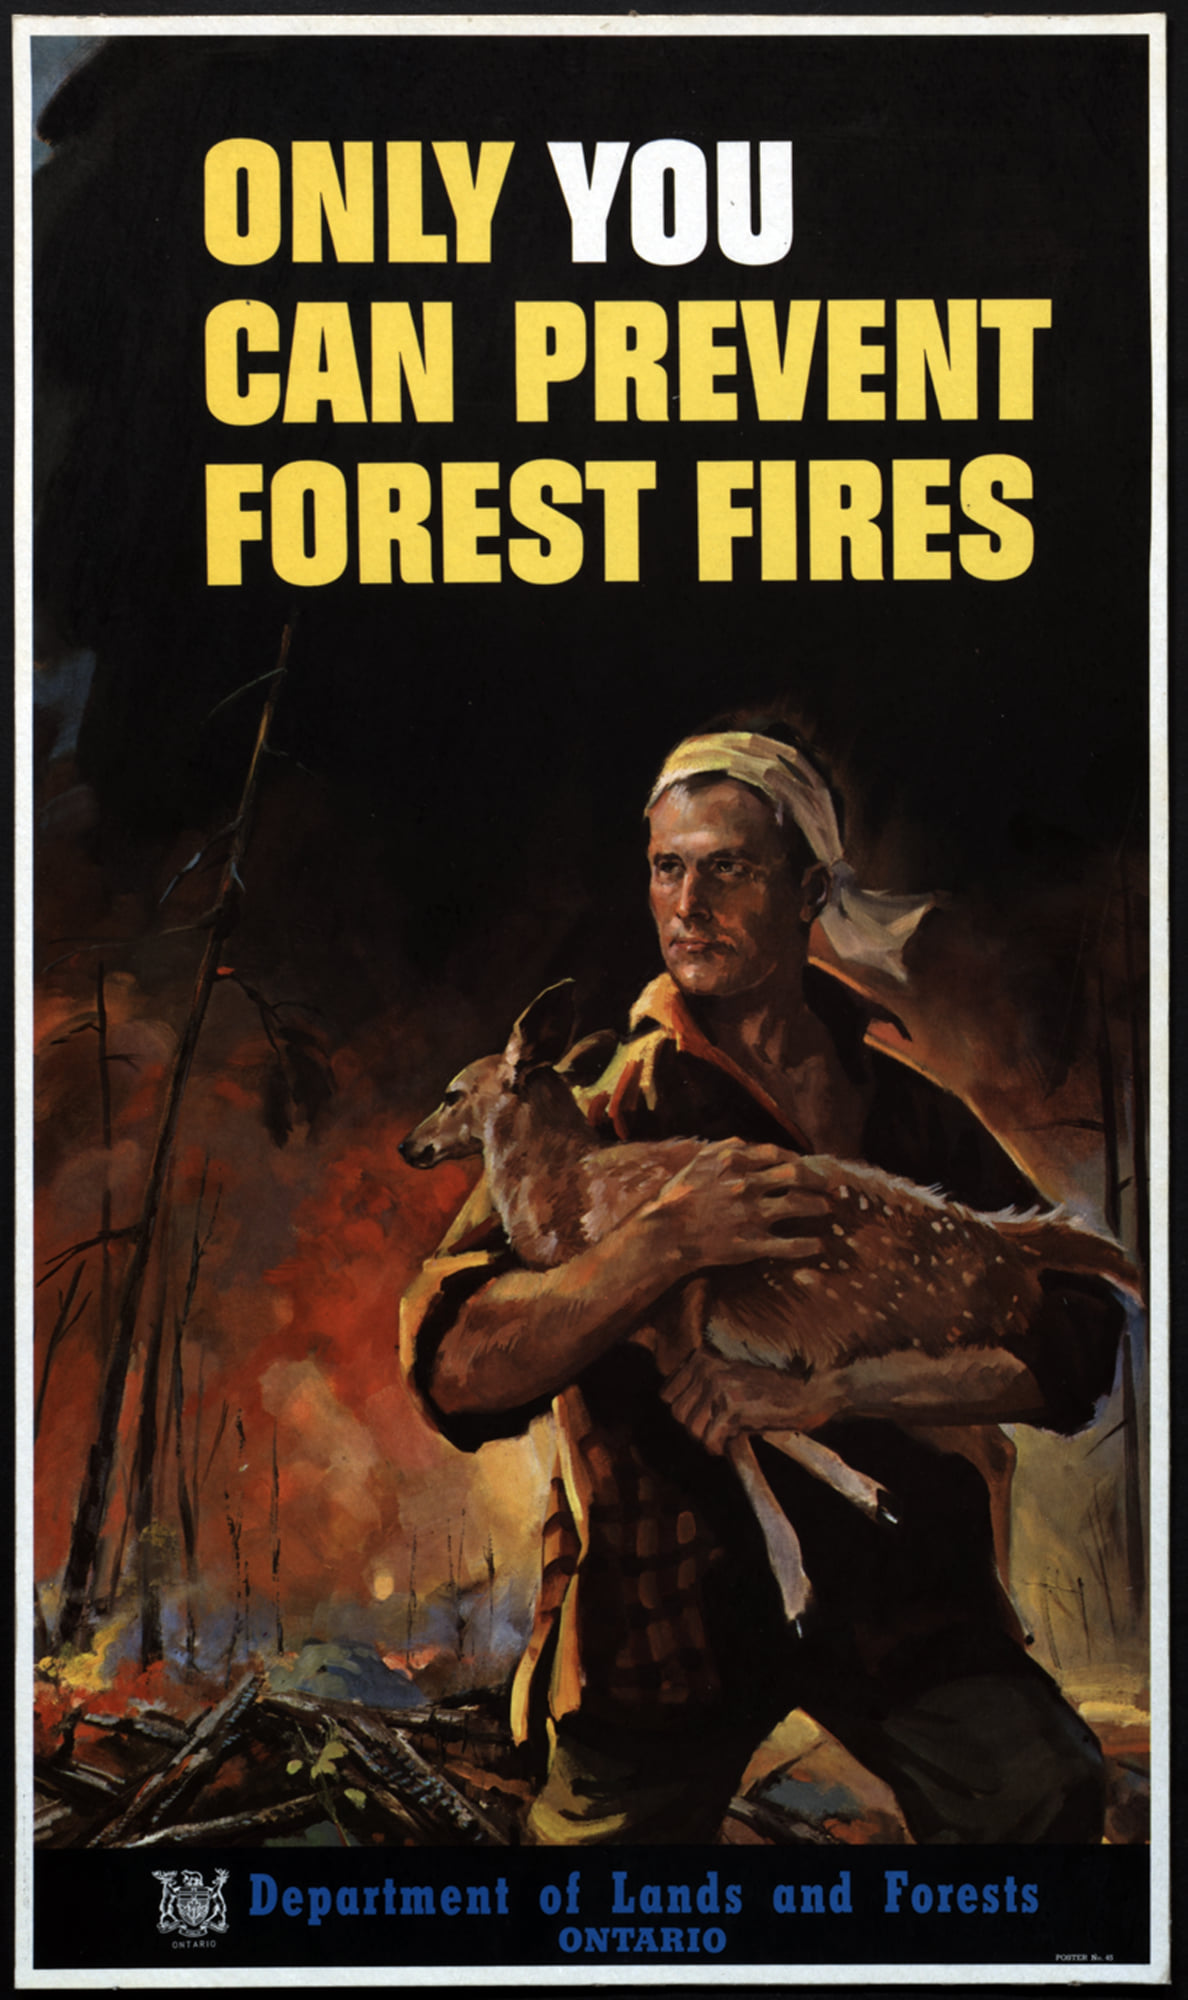 A vintage fire prevention poster put out by the Ontario Department of Lands and Forests. It is a realistic illustration featuring a dramatic black background with hints of an orange forest fire glowing behind a man in the foreground, looking heroically but seriously into the distance as he hugs a small baby deer to his chest, taking it away from the fire. Yellow text above reads "Only you can prevent forest fires". 